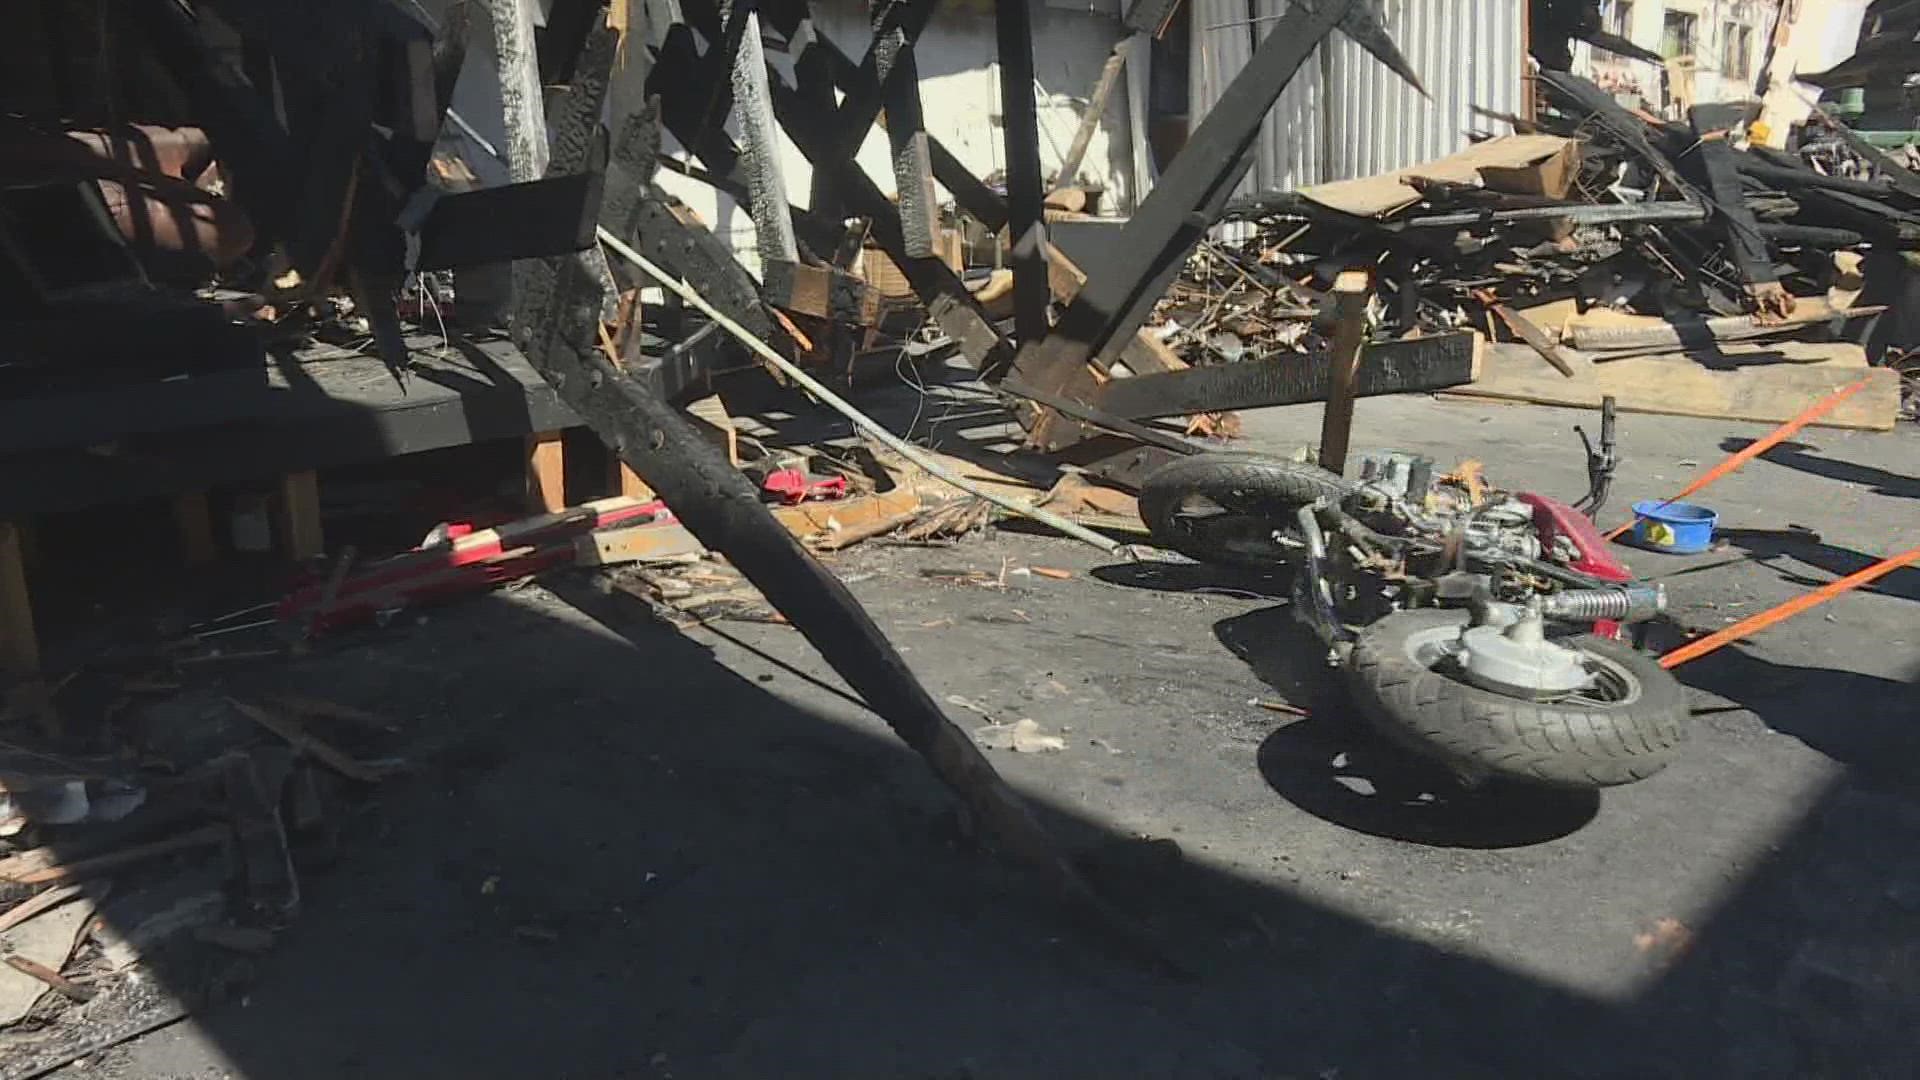 A Valley business and some motorcycle enthusiasts are trying to recover what they can after a fire destroyed rare collectibles.